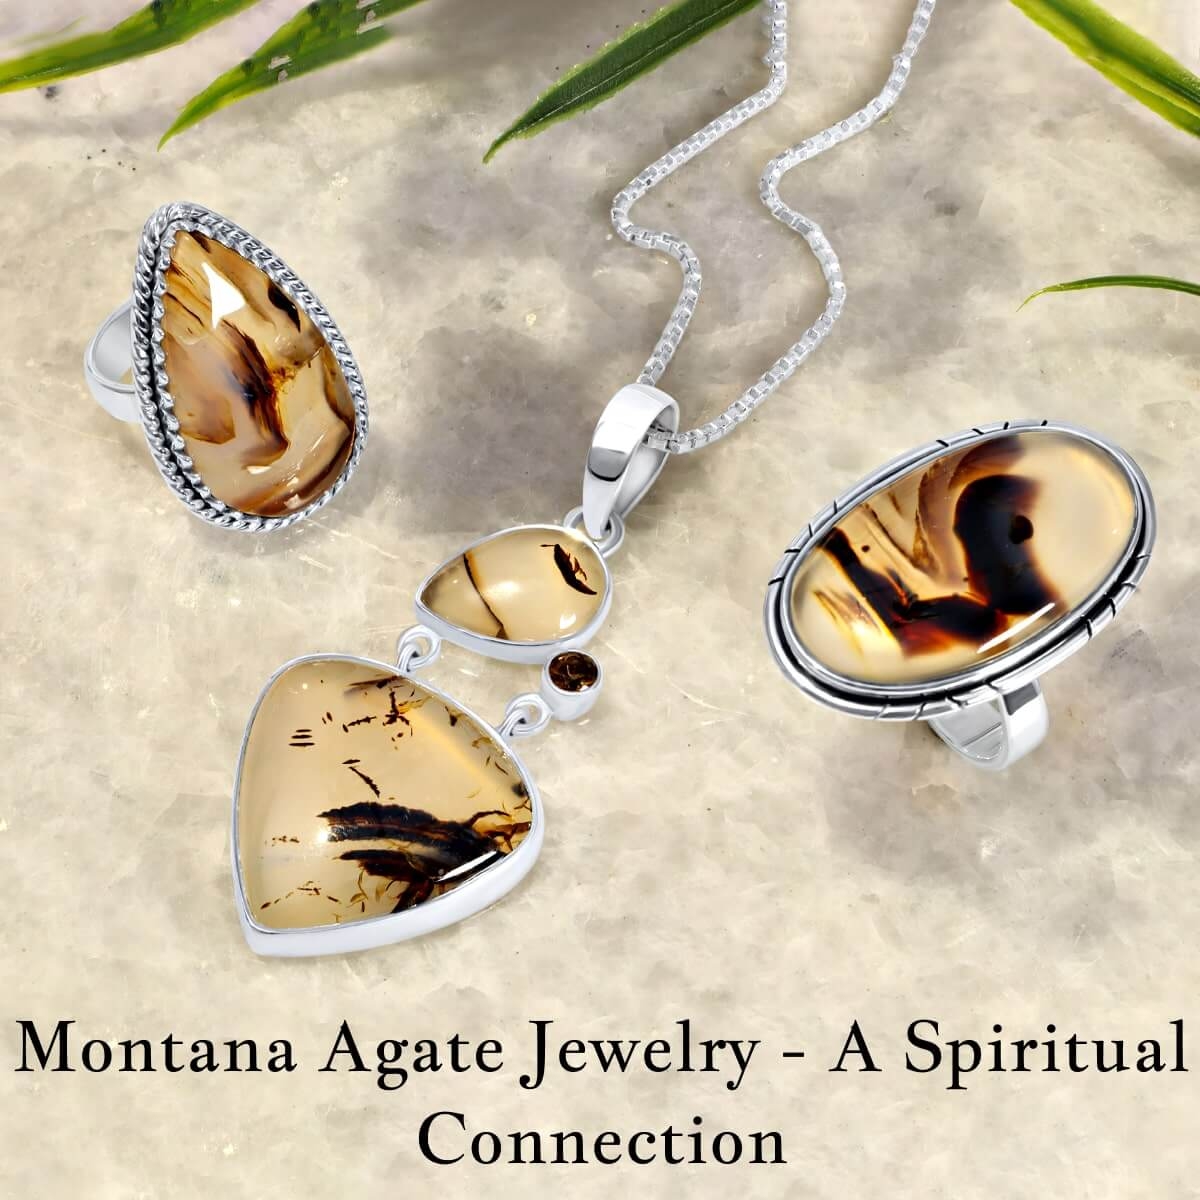 Metaphysical properties of Montana Agate Jewelry